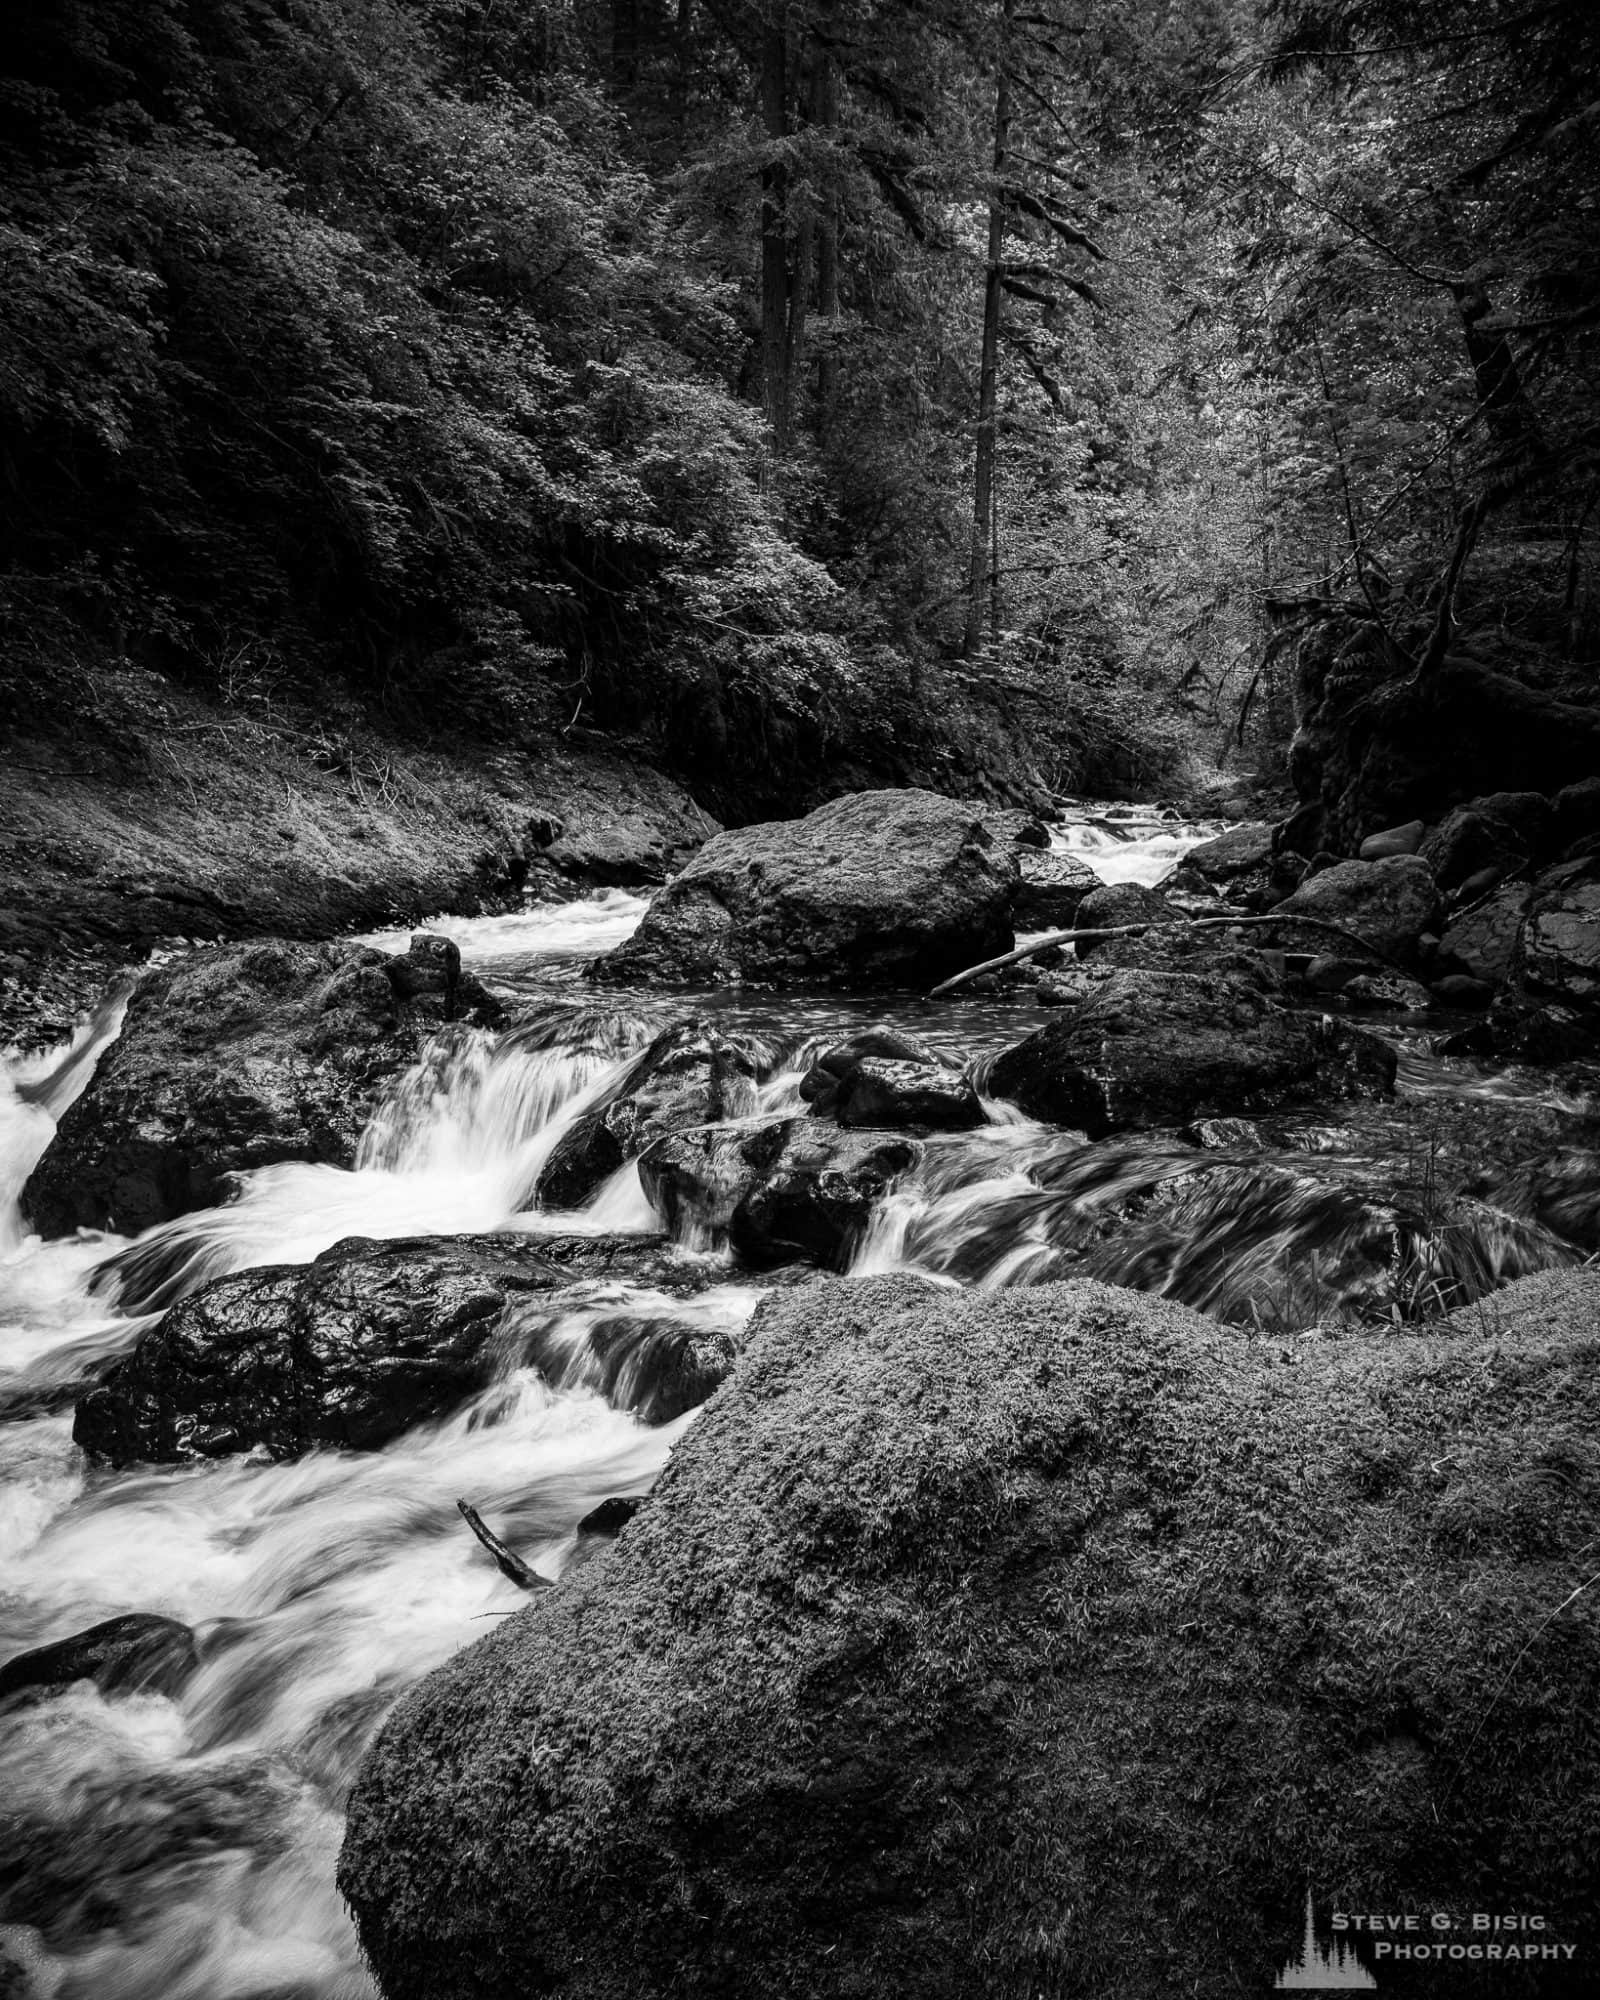 A landscape photograph of a rocky stream bed found along Forest Road 52 (Skate Creek Road) in the Gifford Pinchot National Forest, Washington.